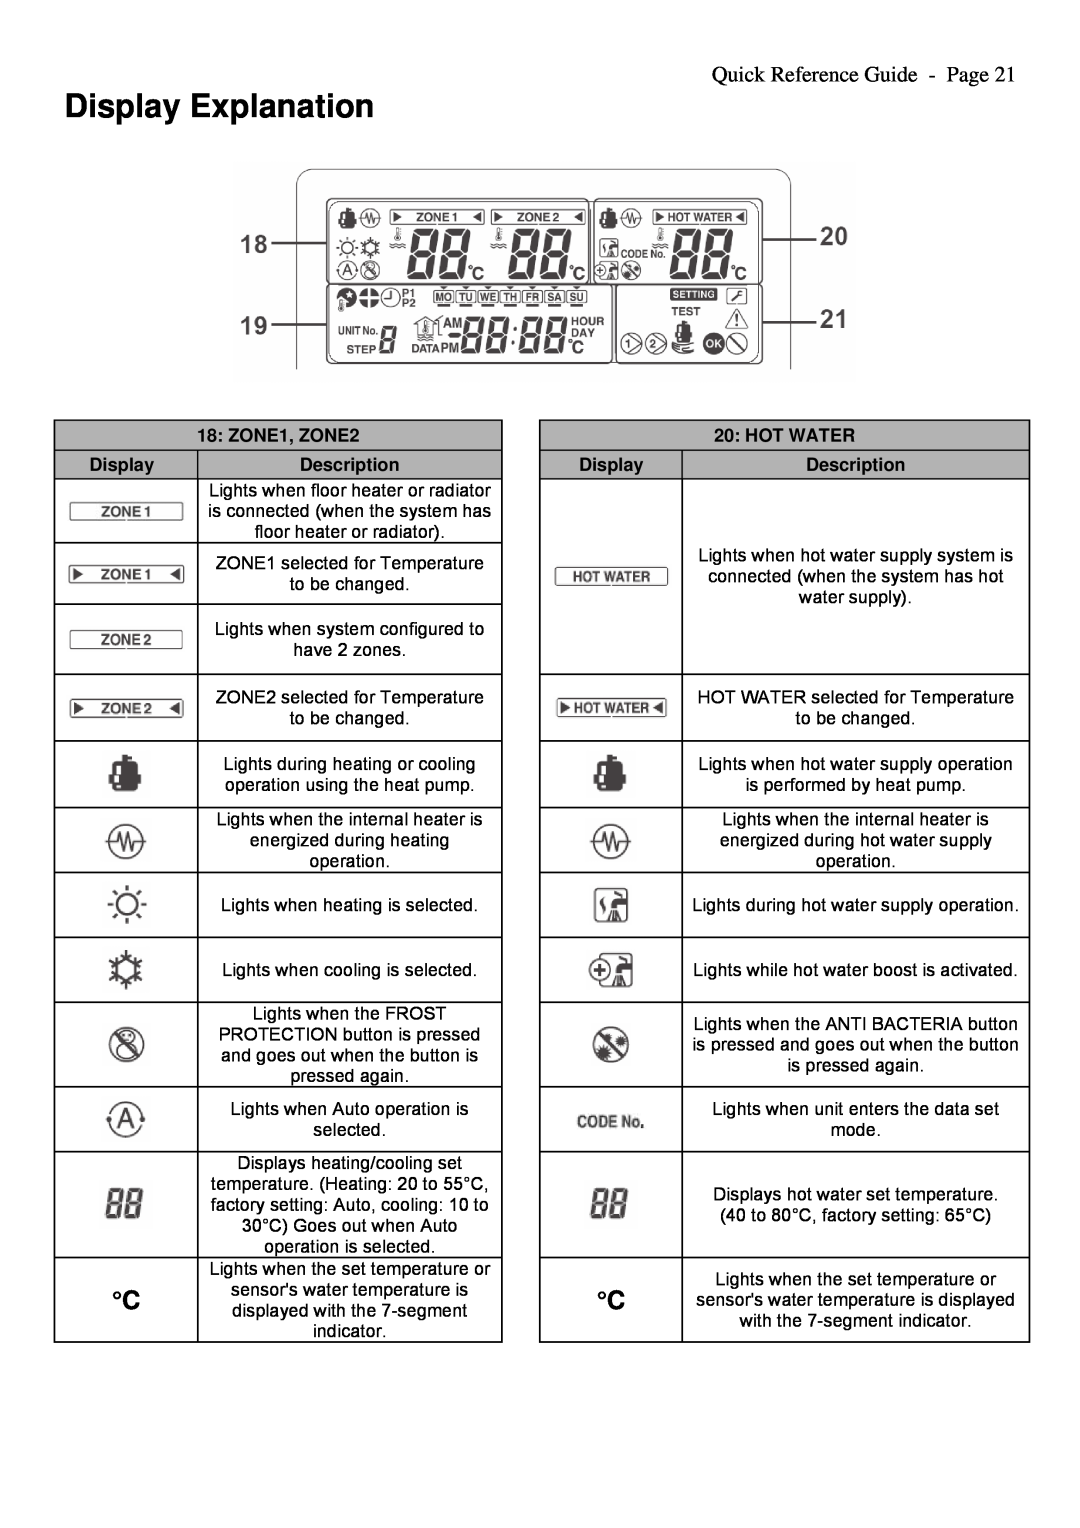 Toshiba A09-01P manual Display Explanation, Quick Reference Guide - Page 